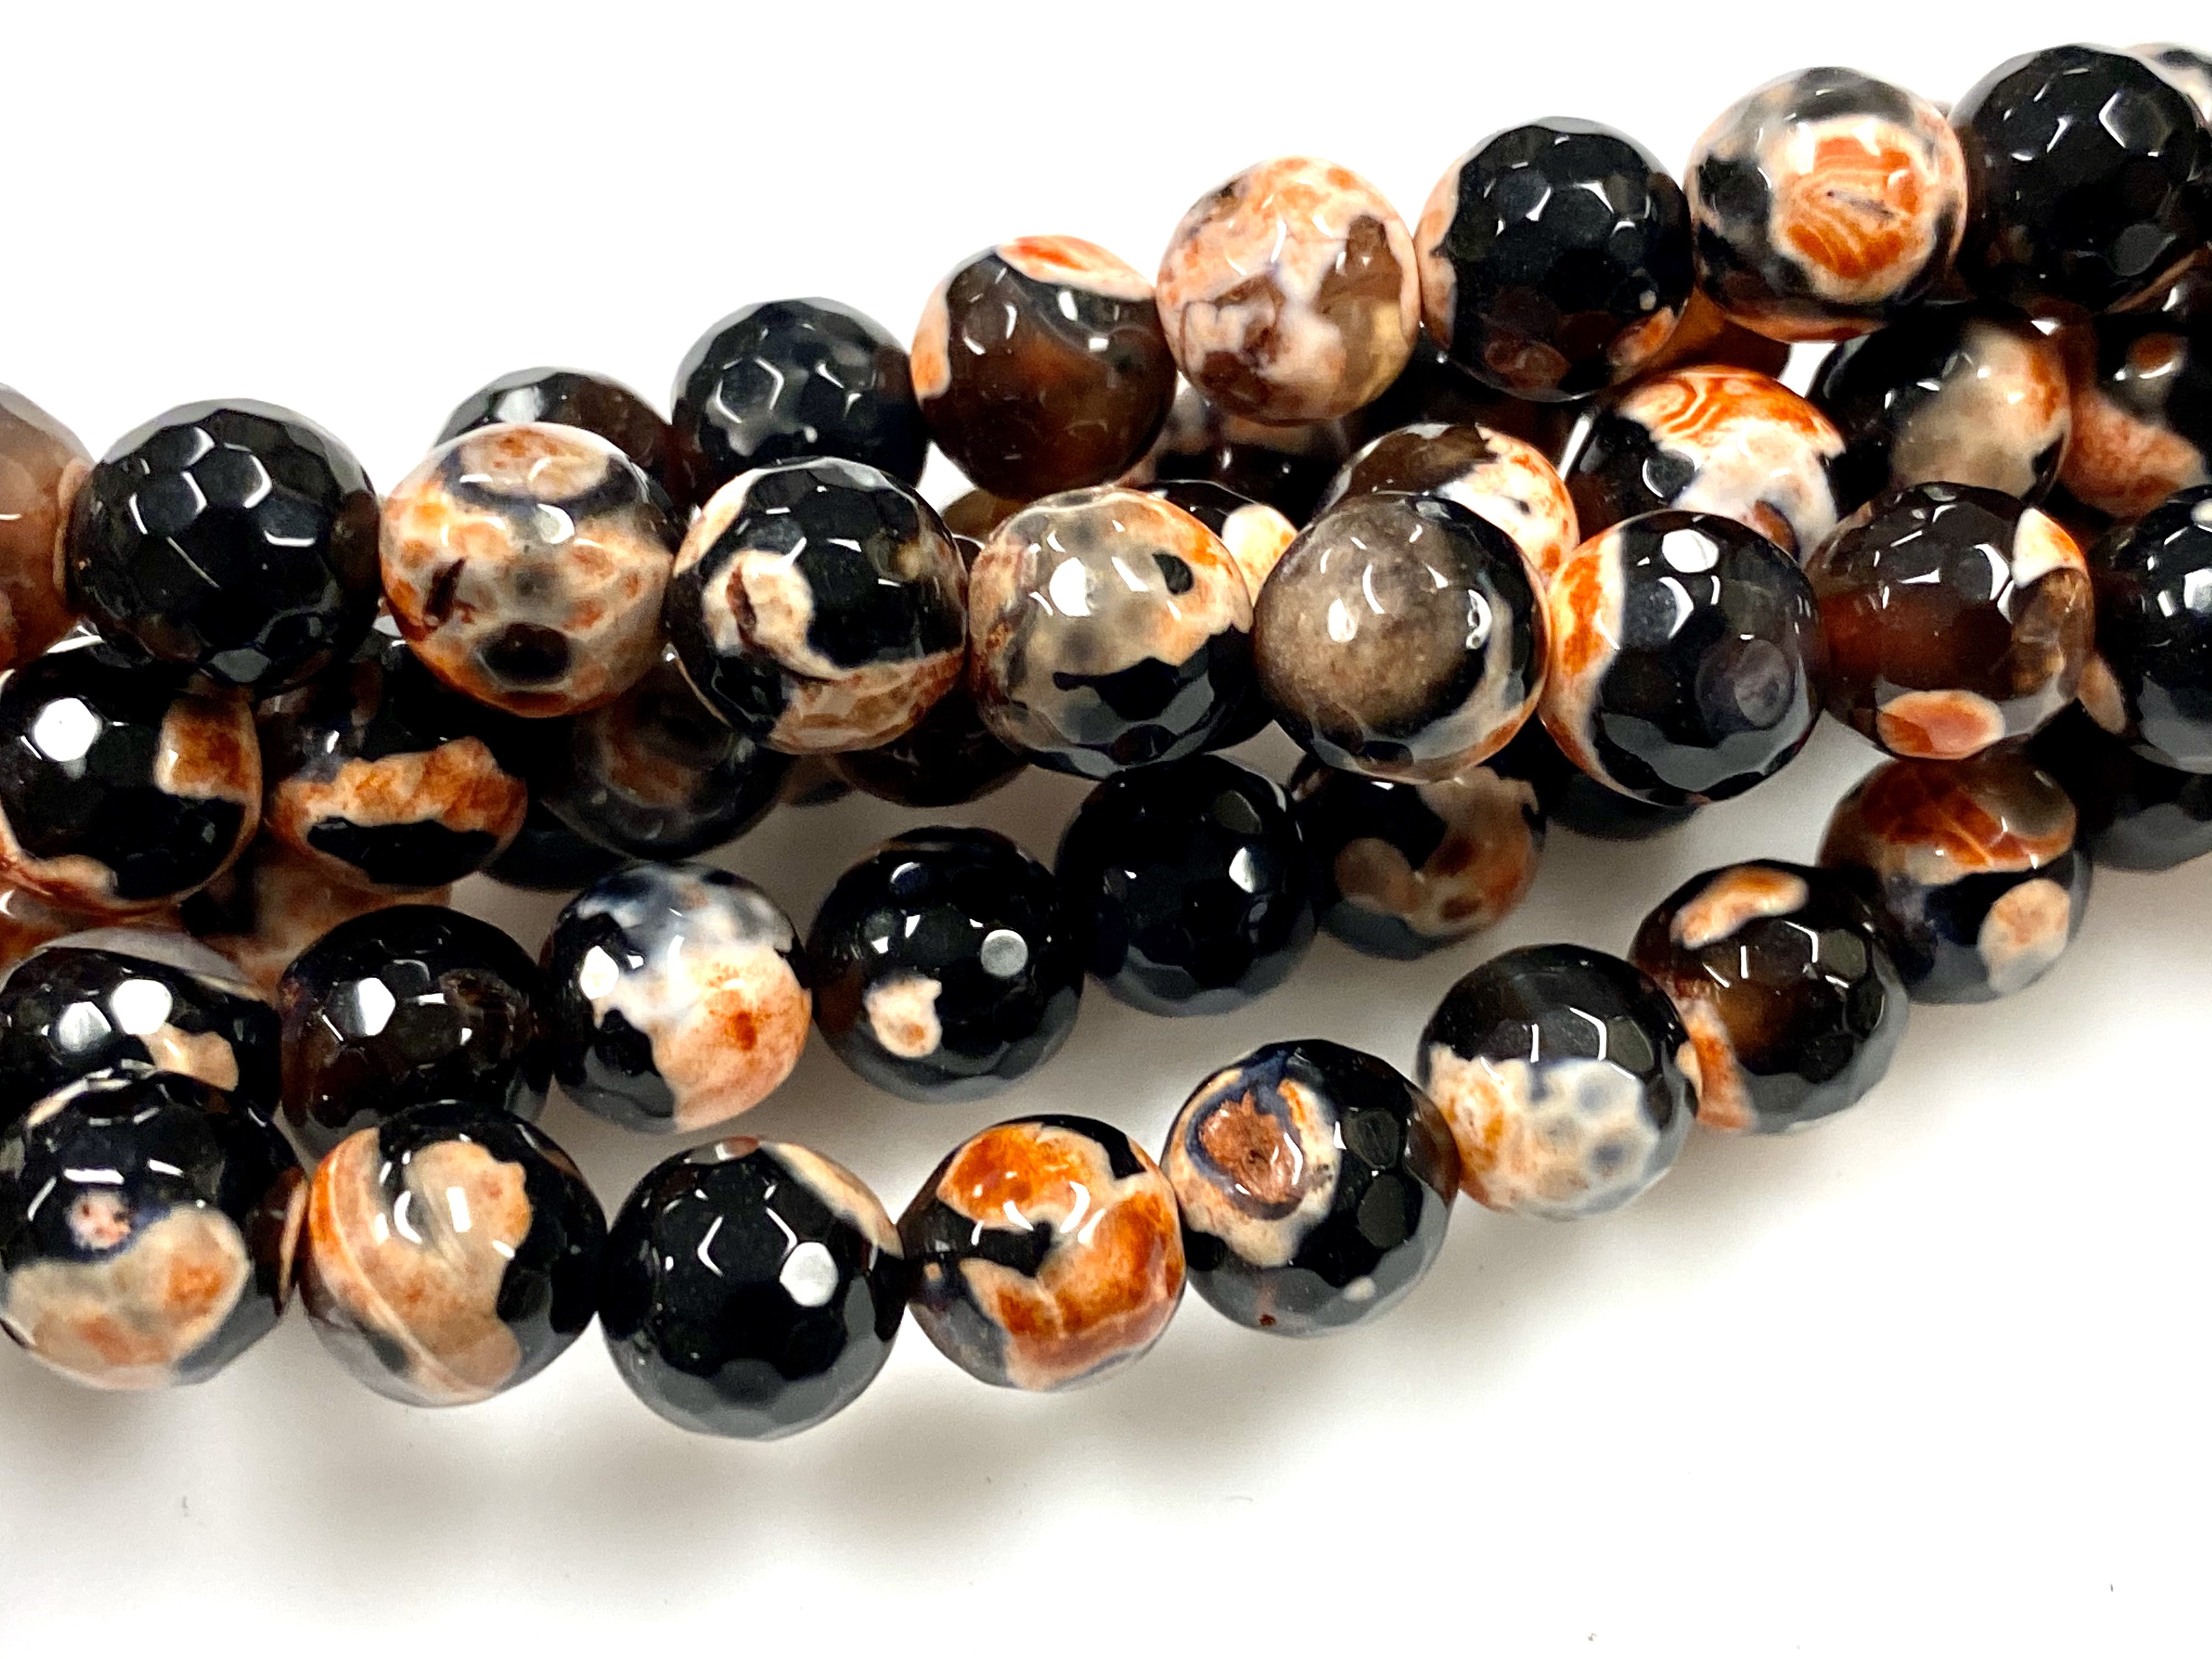 Orange Faceted 14mm Beads Semi Precious Beads Genuine Agate Beads Faceted Agate Bead Strand Agate Beads for Jewellery Making 27 beads